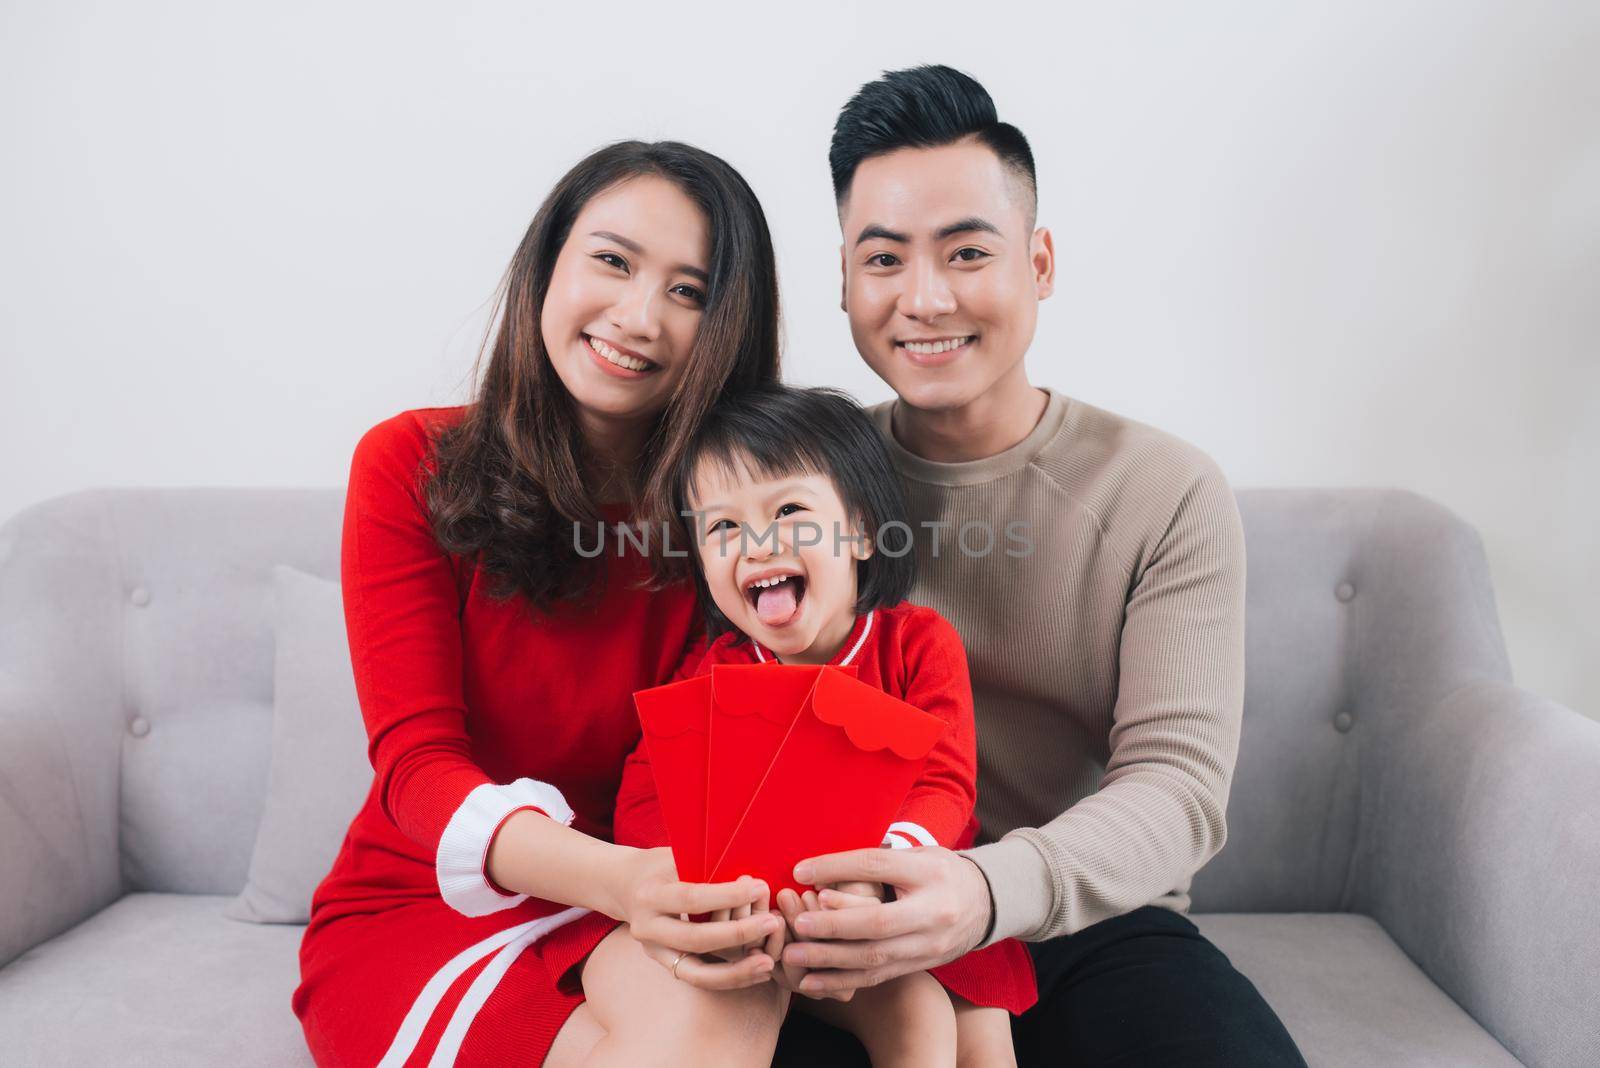 Happy Vietnamese family celebrate Lunar new year at home.